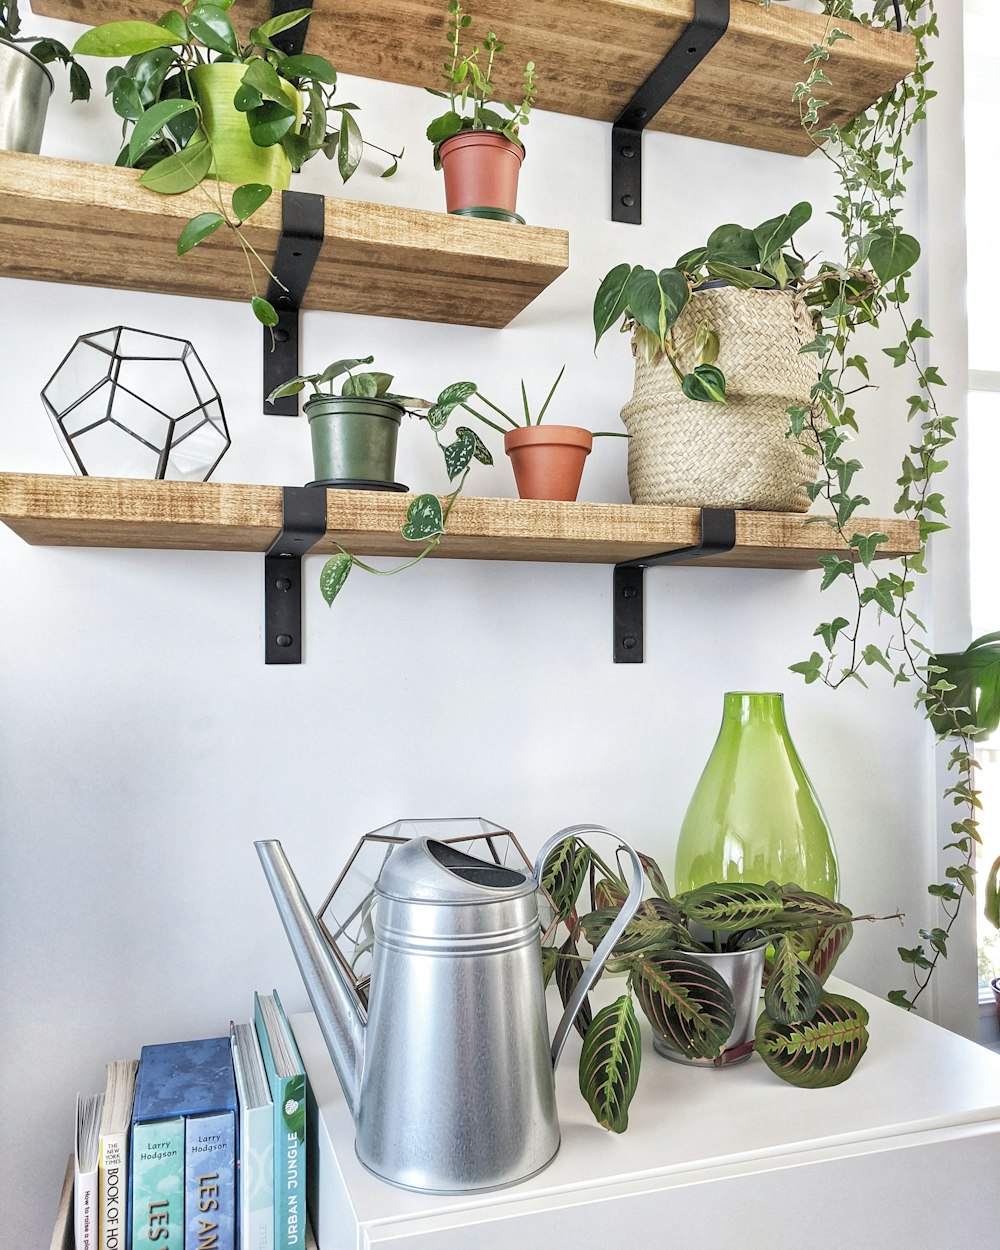 a shelf filled with potted plants and a watering can